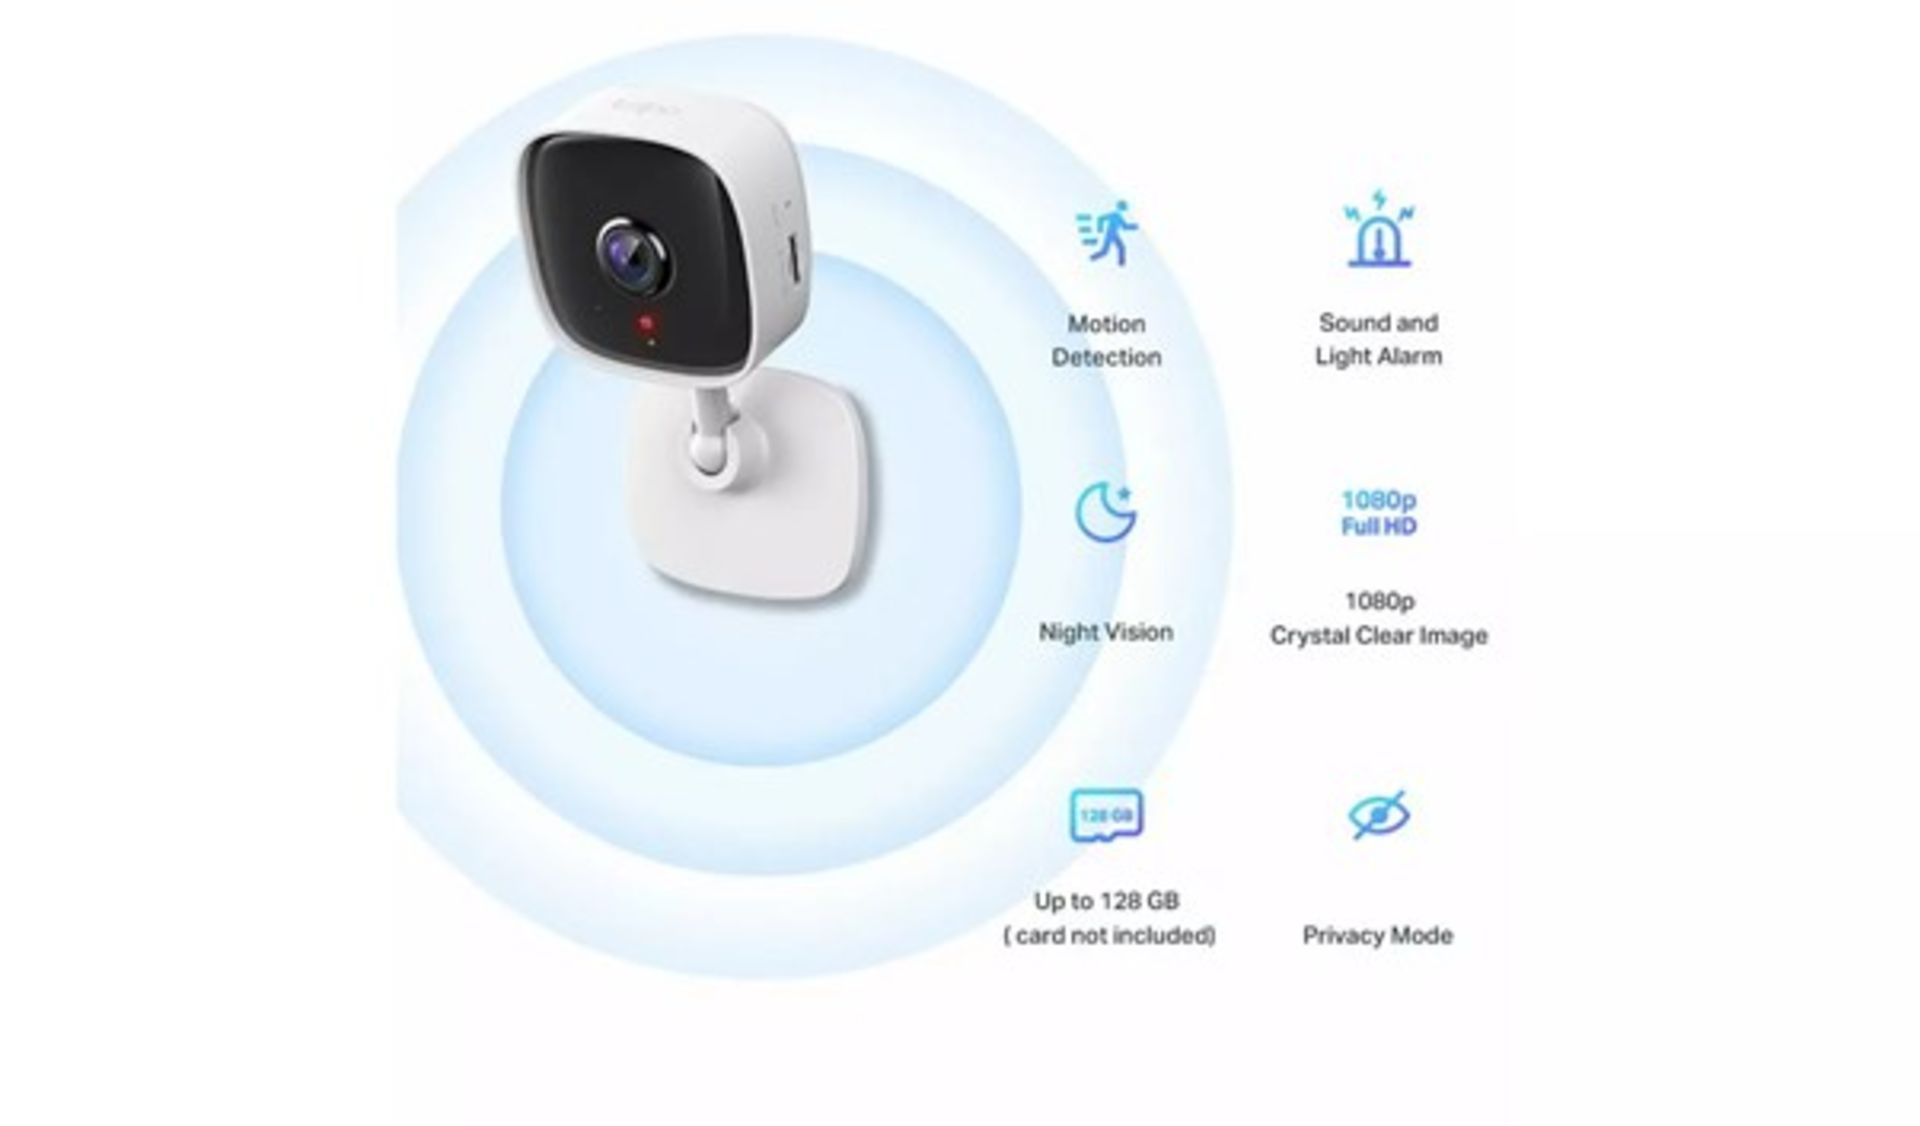 BRAND NEW AND UNUSED SMART 1080P WI-FI INDOOR CAMERA TP-LINK TAPO C100 *NO VAT* - Image 4 of 7